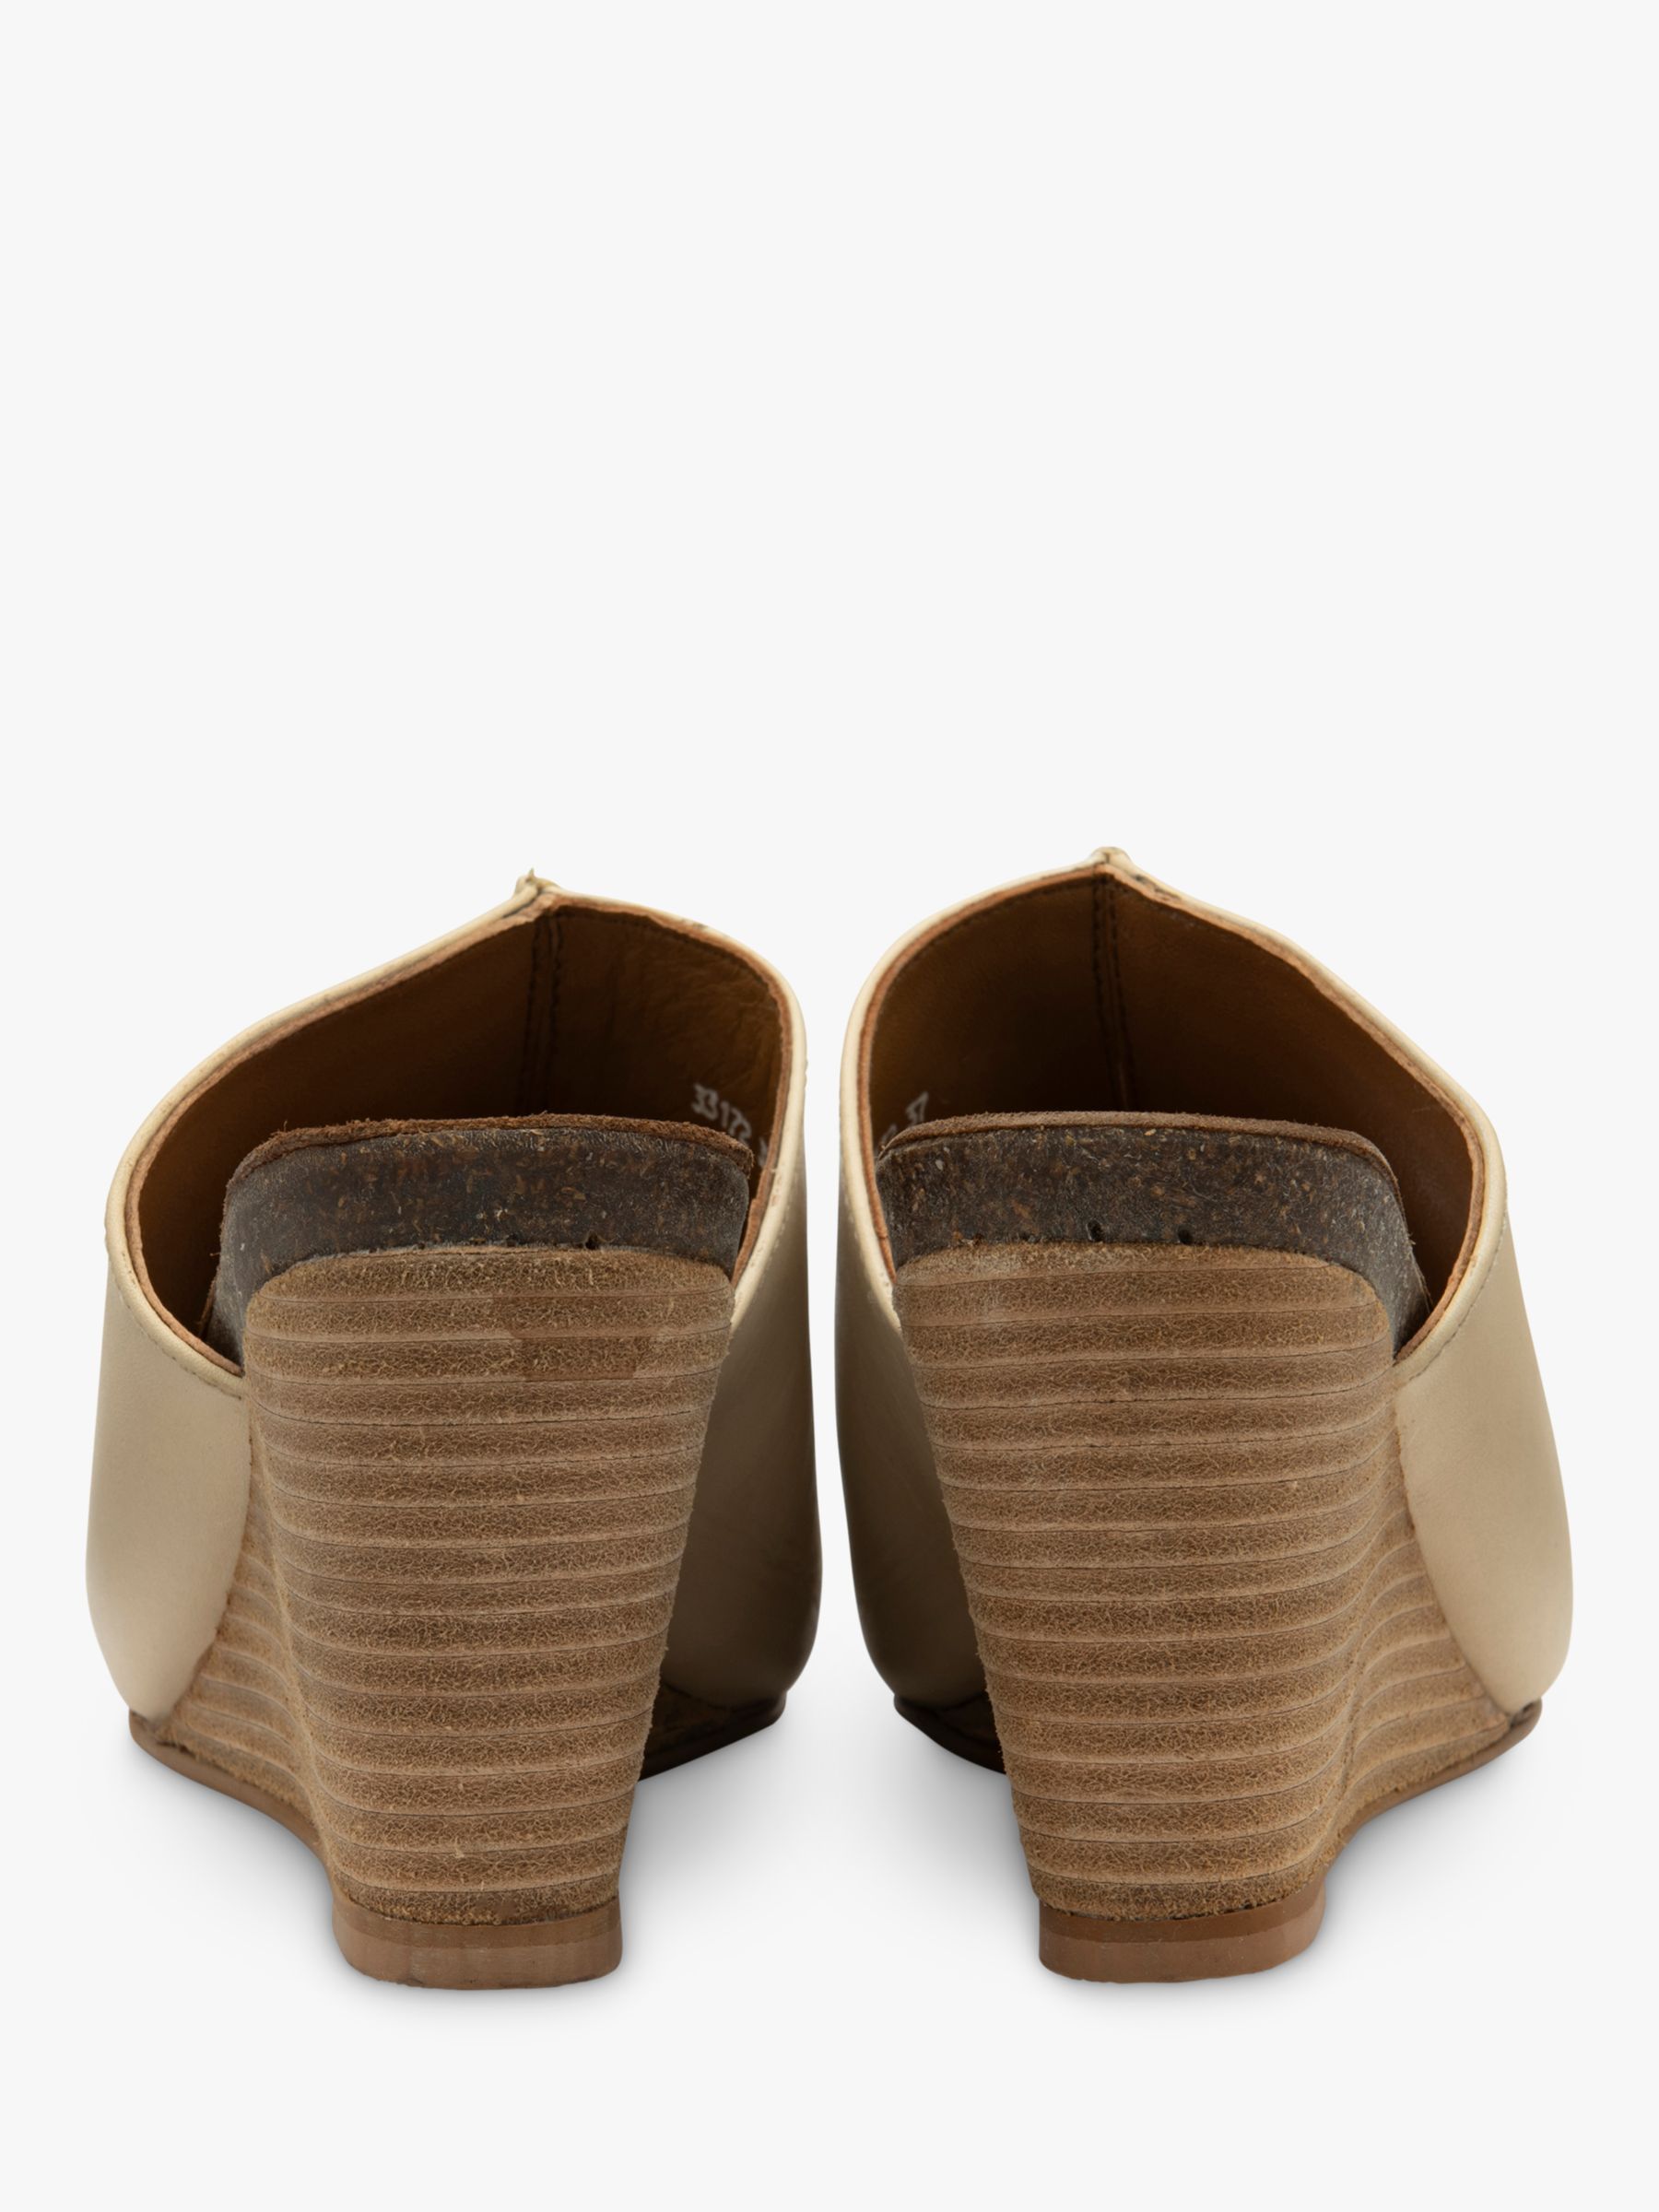 Buy Ravel Corby Leather Wedge Sandals Online at johnlewis.com